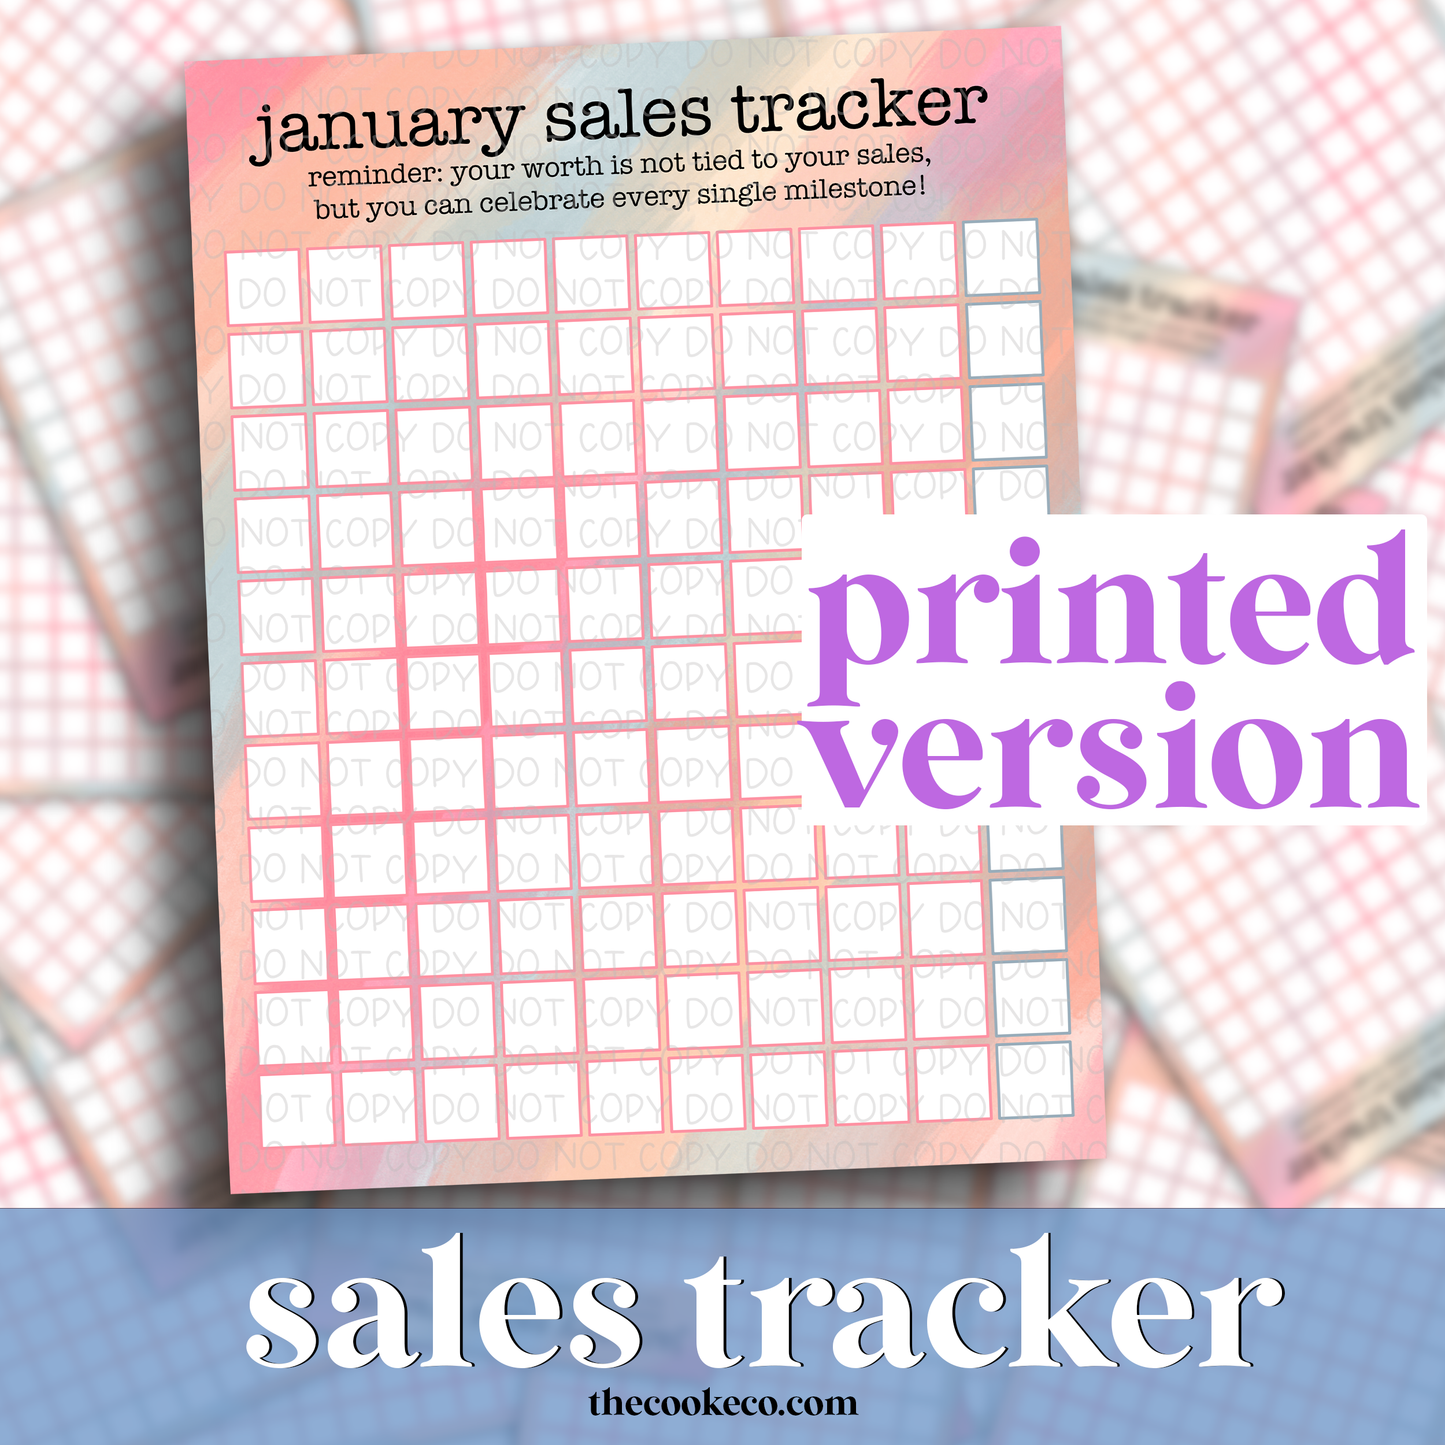 JANUARY SALES TRACKER - PRINTED ON CARDSTOCK